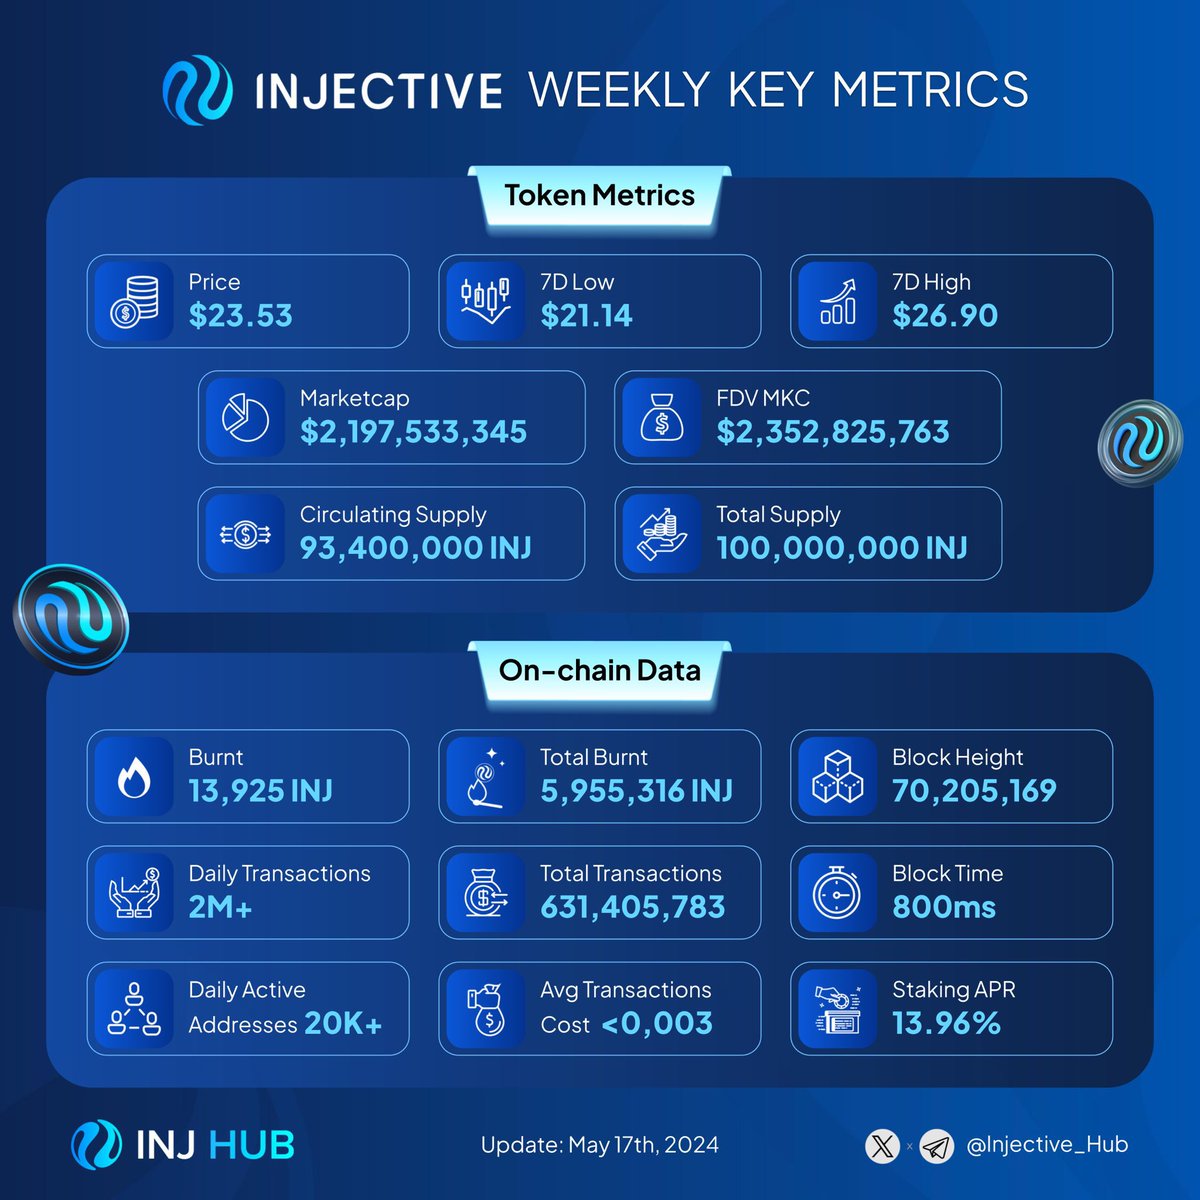 Injective On-chain Key Metrics in an Infographic:

- Daily Transactions: Steady at over 2 million.
- Staking APR: Fluctuating around 13.96%.
- On-chain Transactions: Surpassed 631 million🔥.
- $INJ Burned: 13,925 tokens.

All is just amazing on @injective